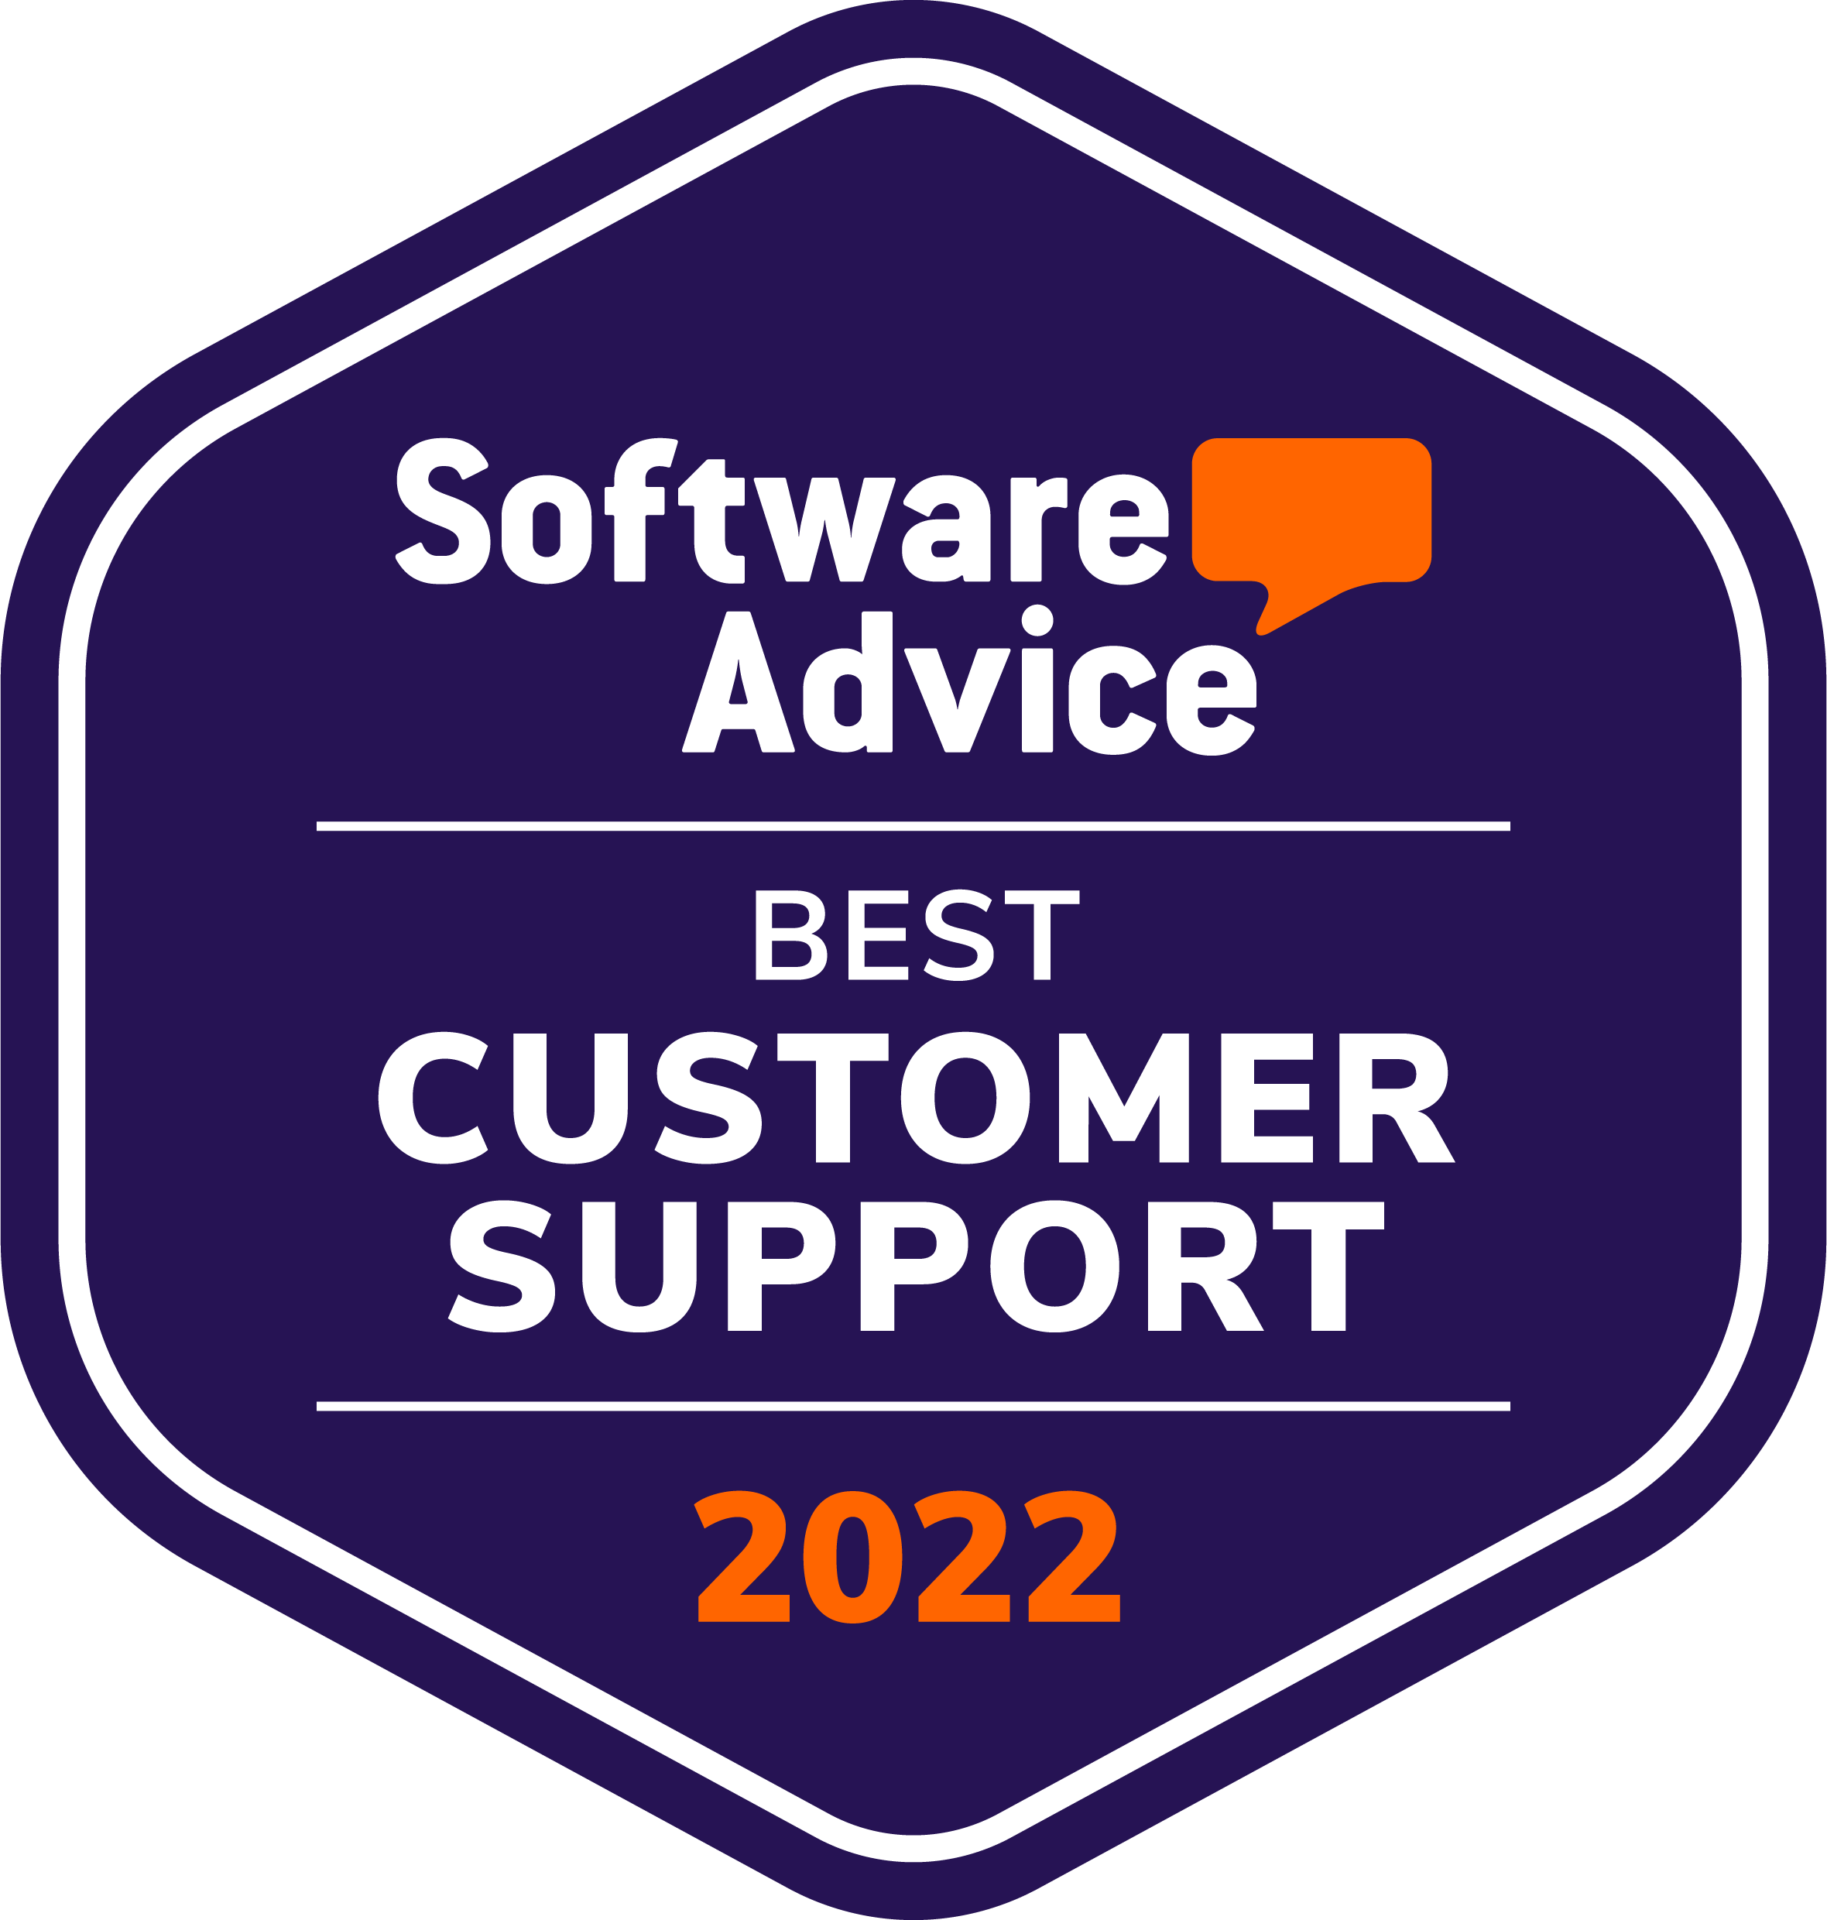 Software Advice awarded softgarden the ‘Best Customer Support’ category in 2022